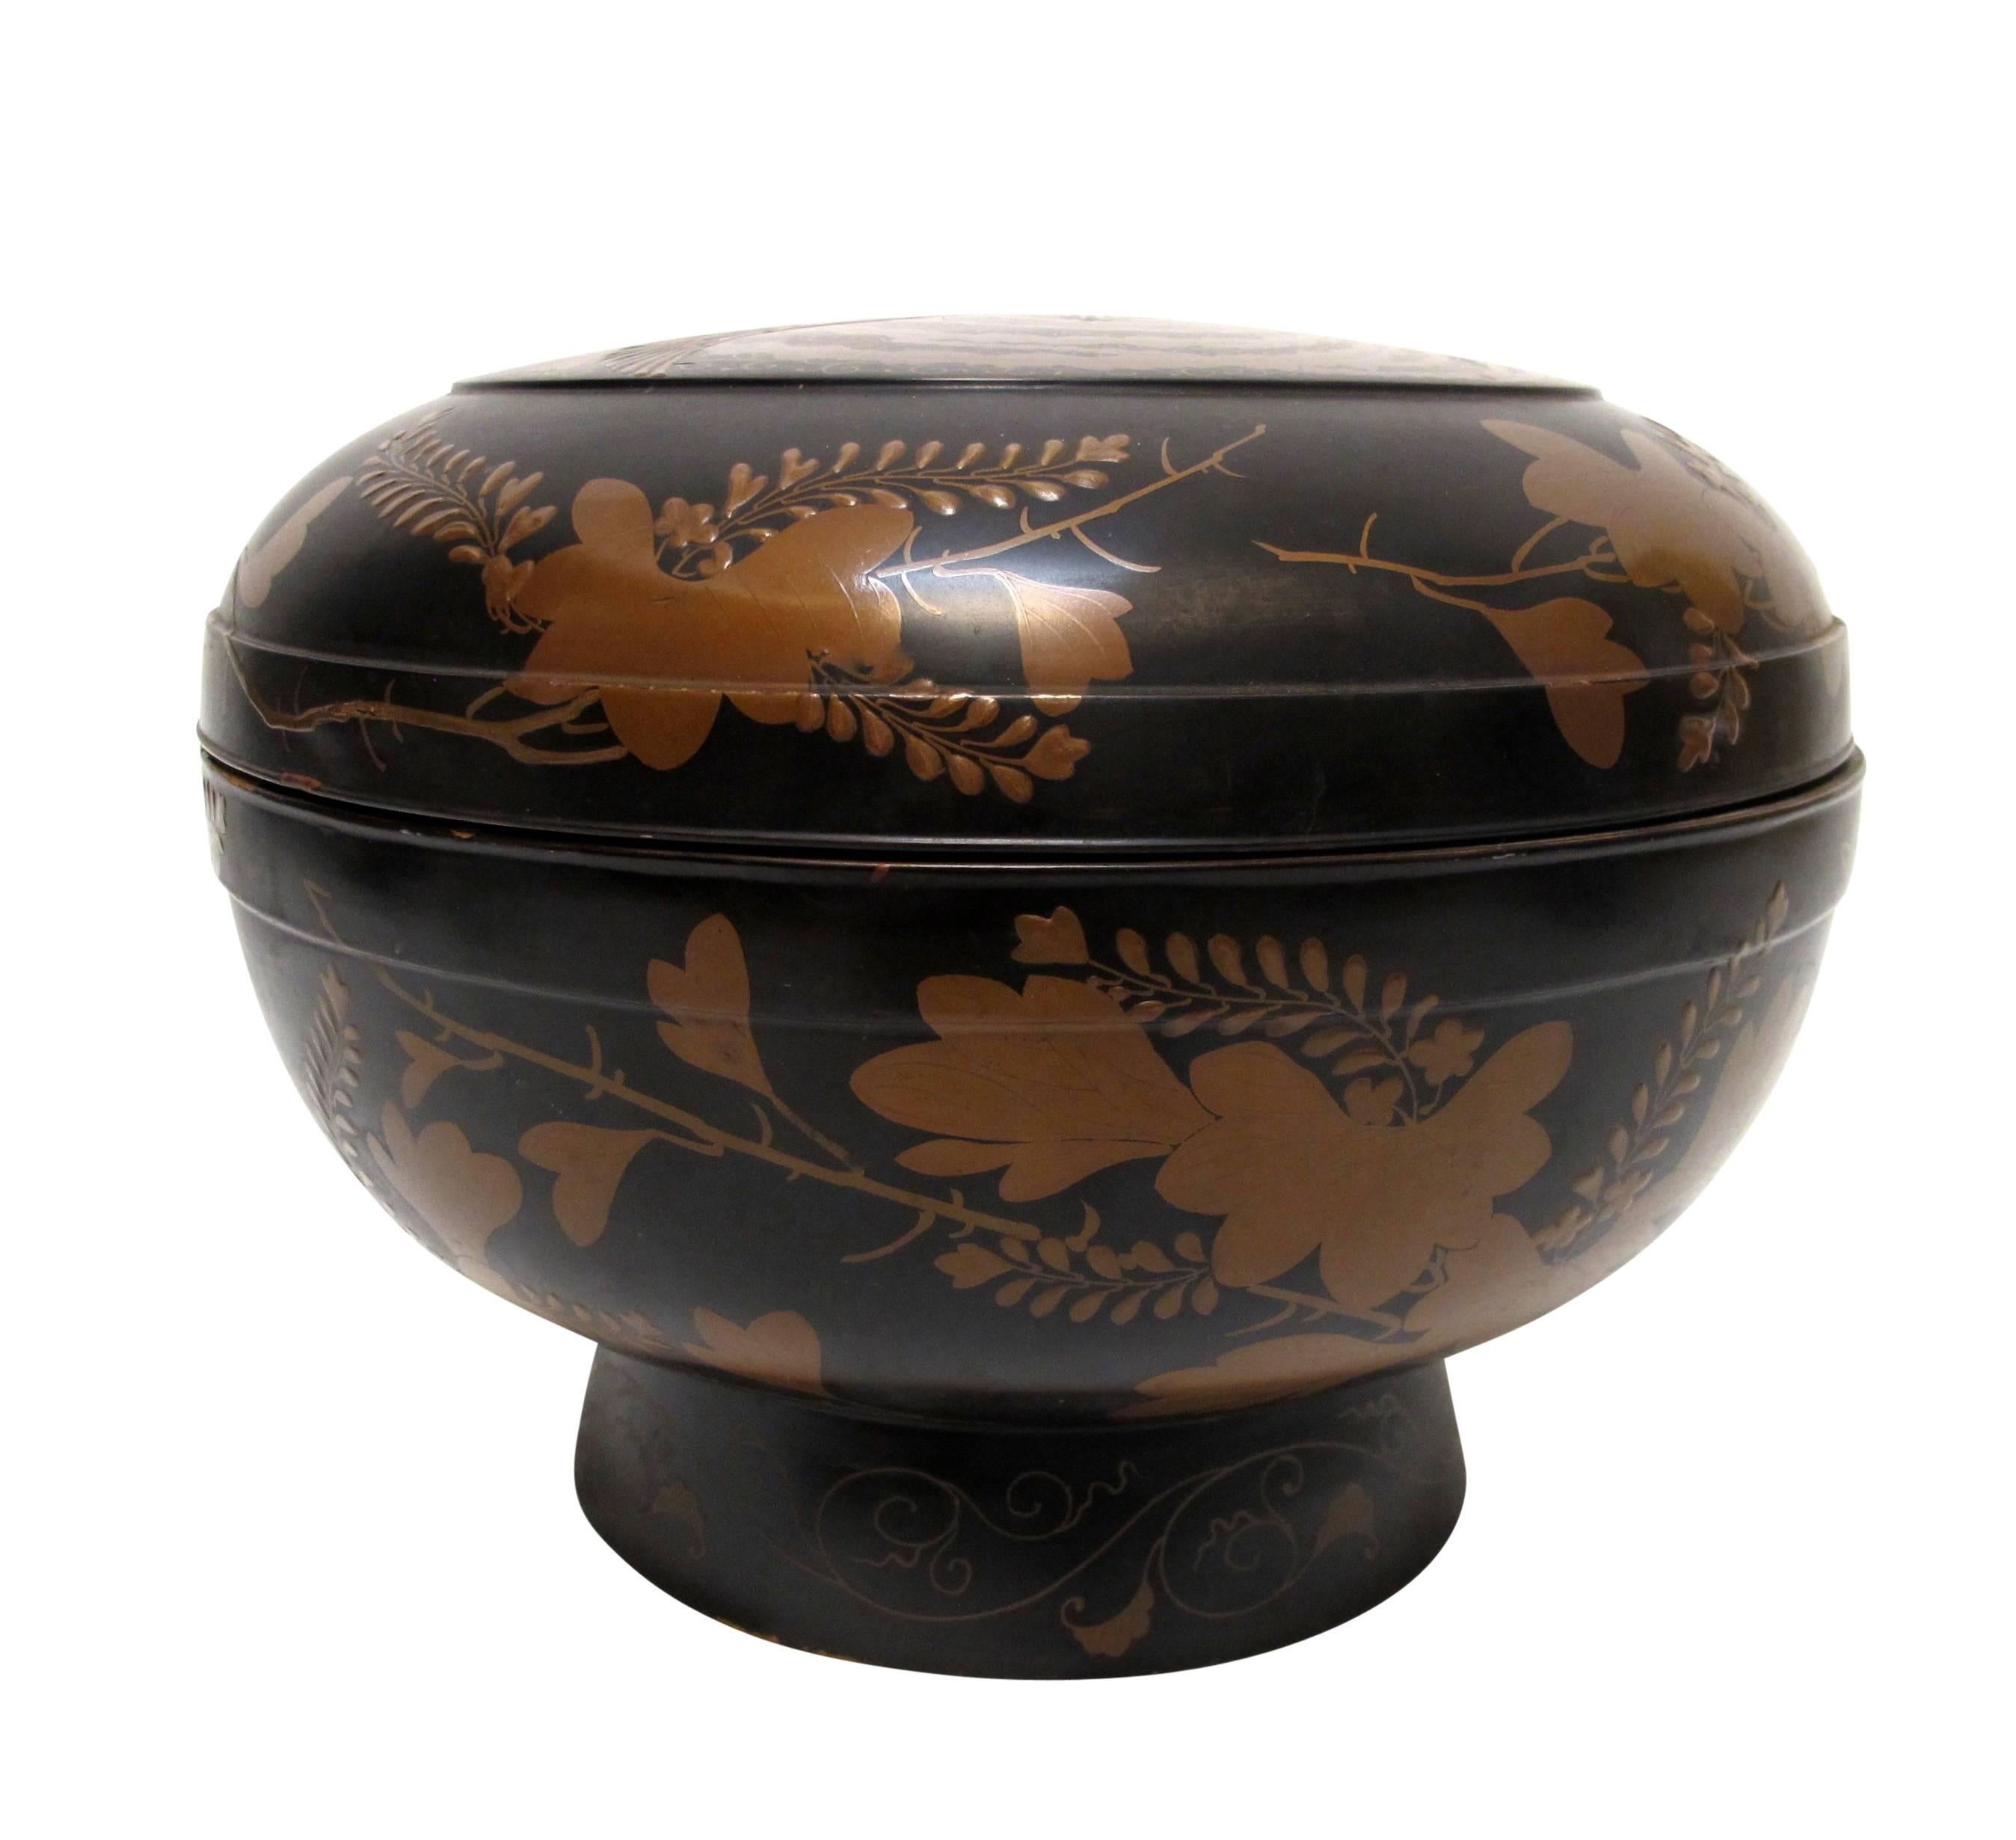 A large Japanese Meiji period lacquered lidded soup or rice bowl. Beautiful hand-painted decoration inside and out.